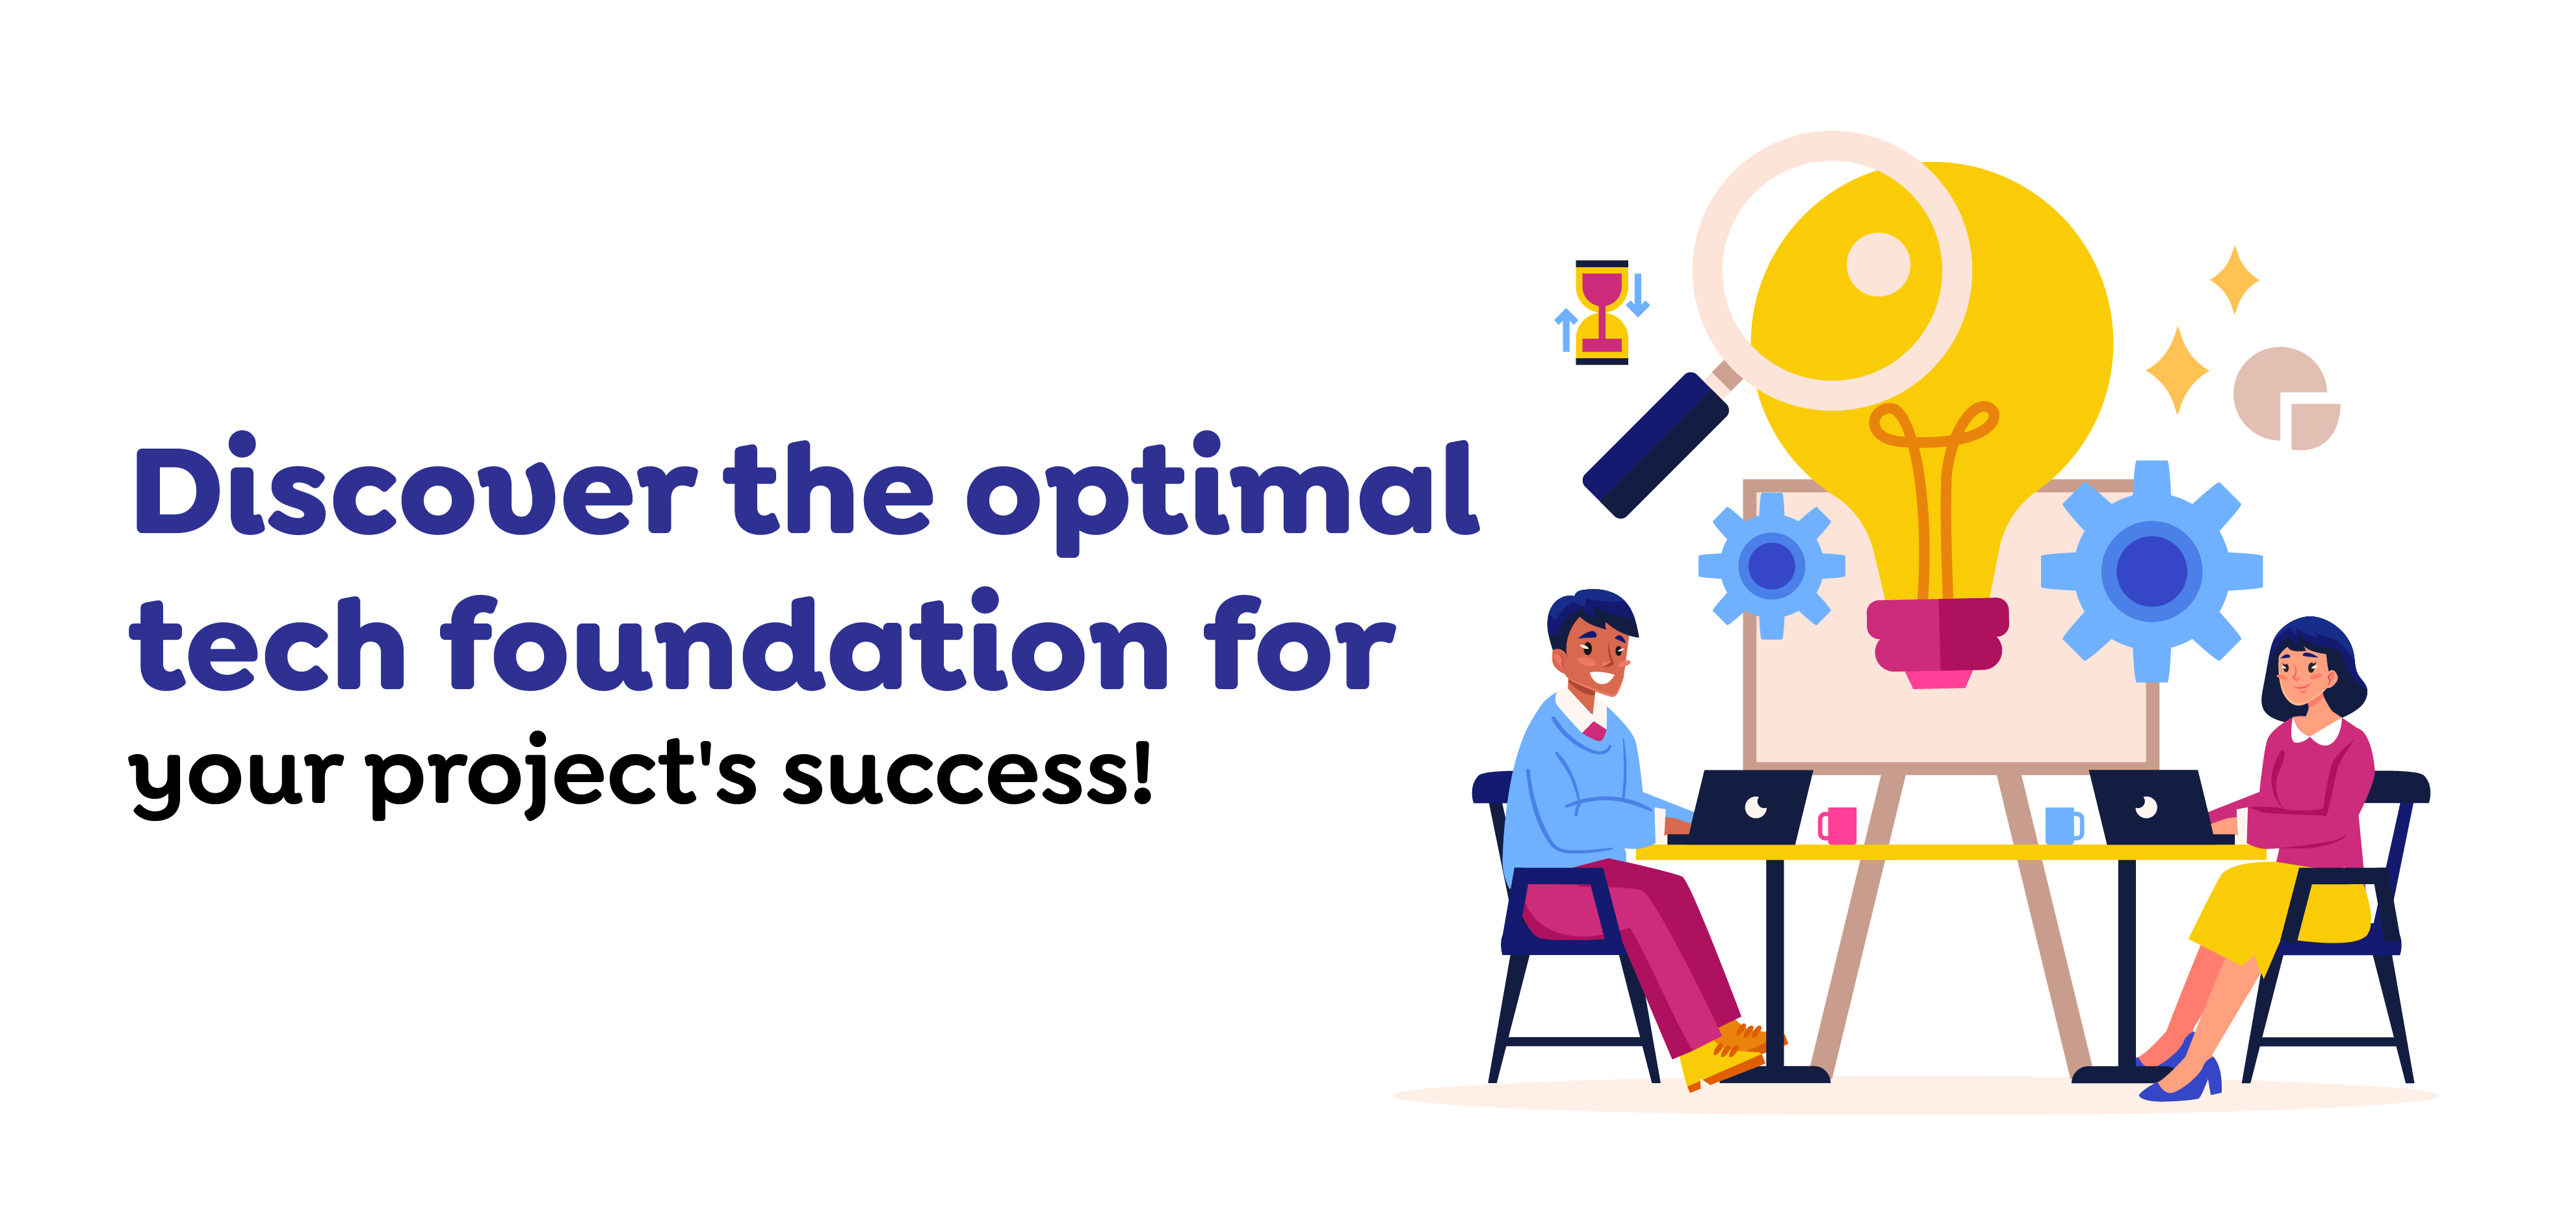 Discover the optimal tech foundation for your project's success!